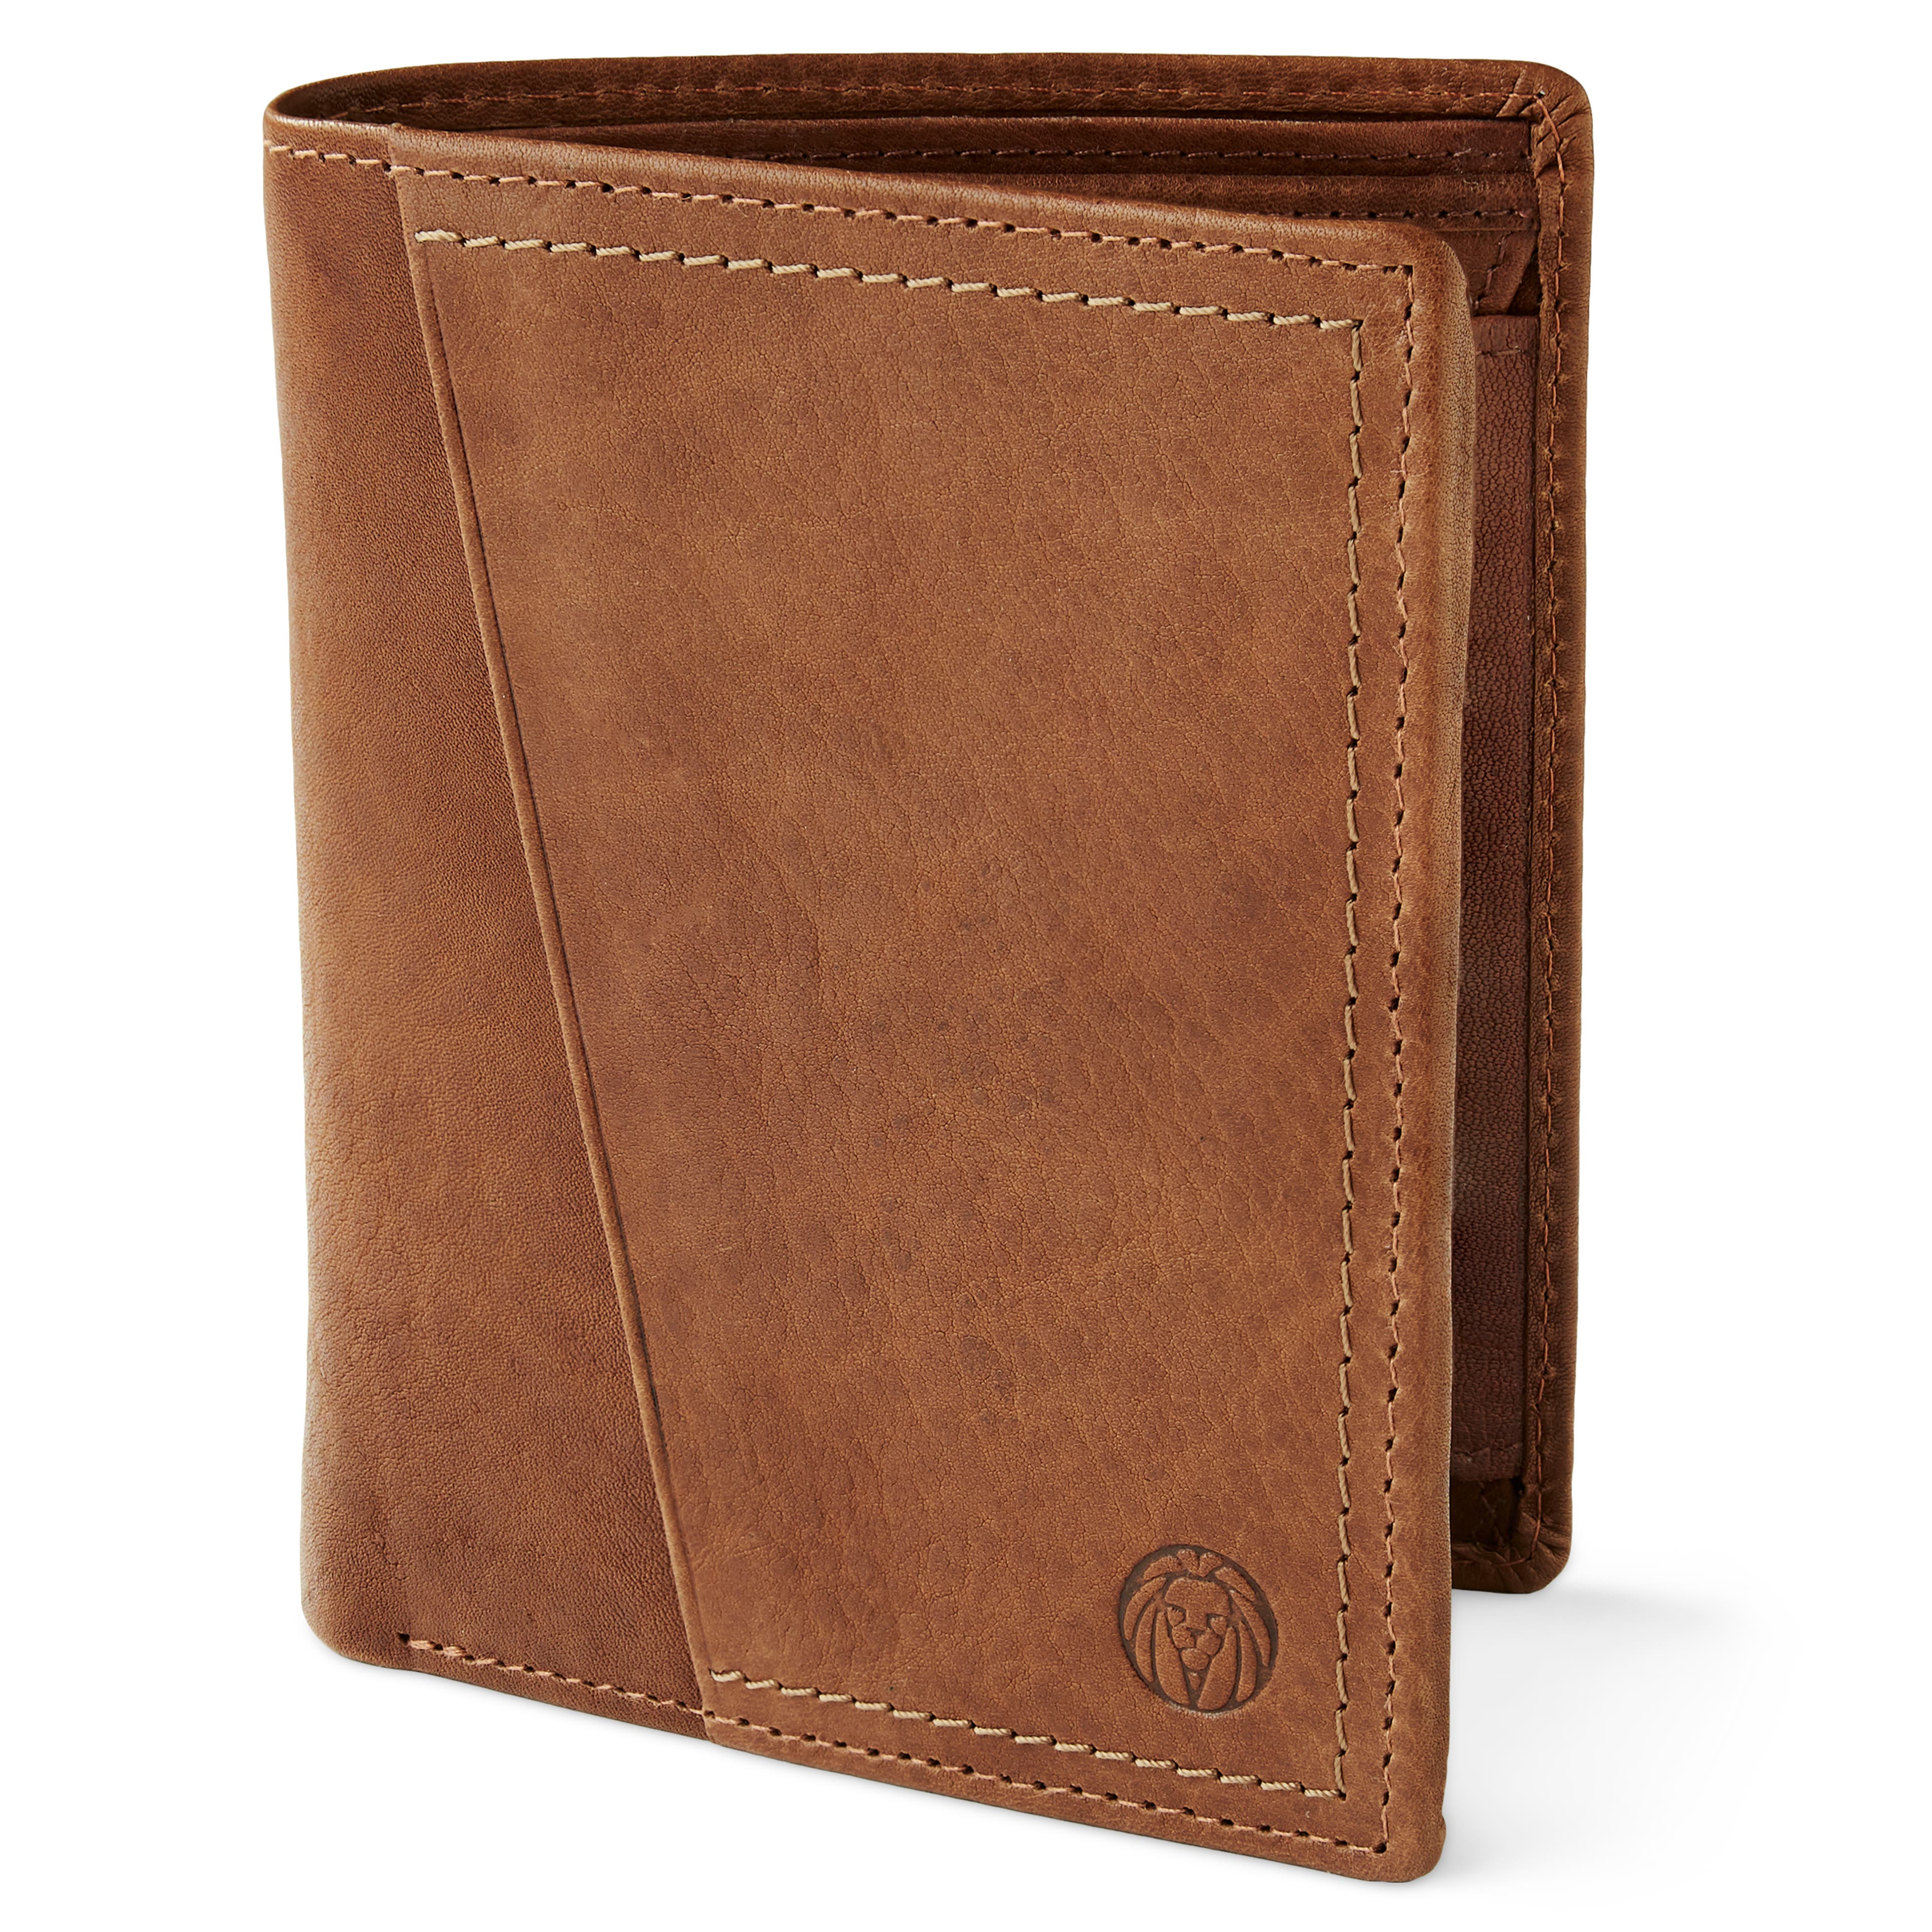 Cambodia Rustic Tan RFID Leather Wallet